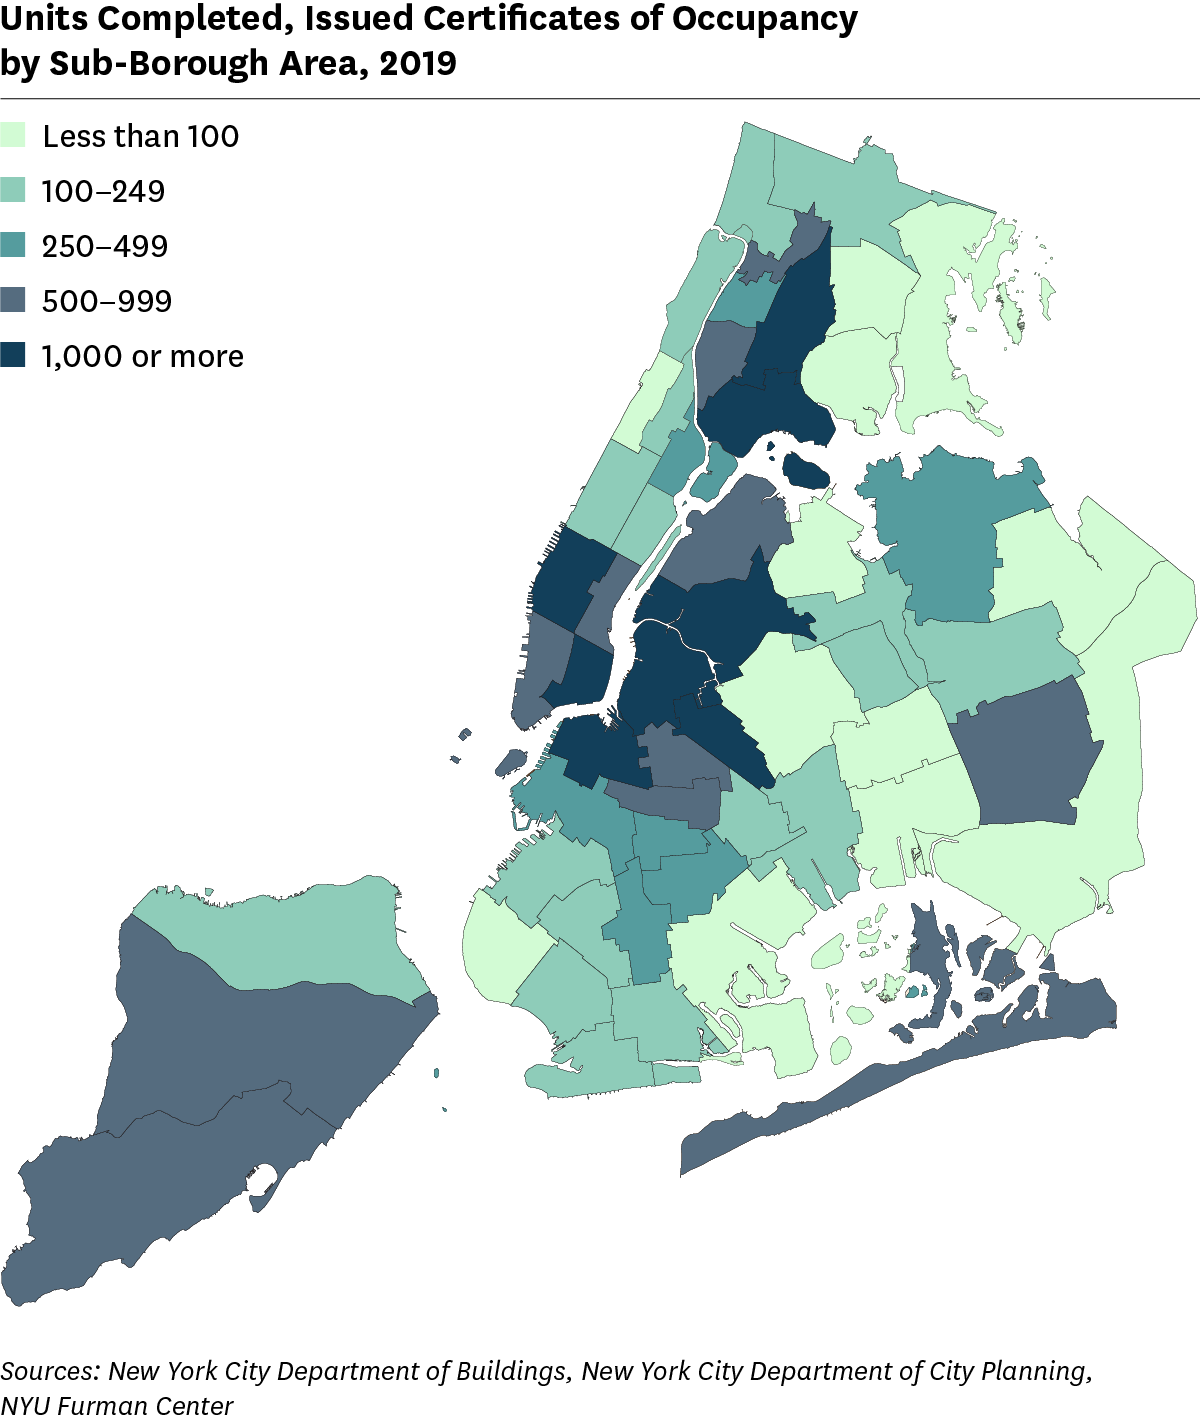 Map showing number of completed residential issued certificates of occupancy by Borough